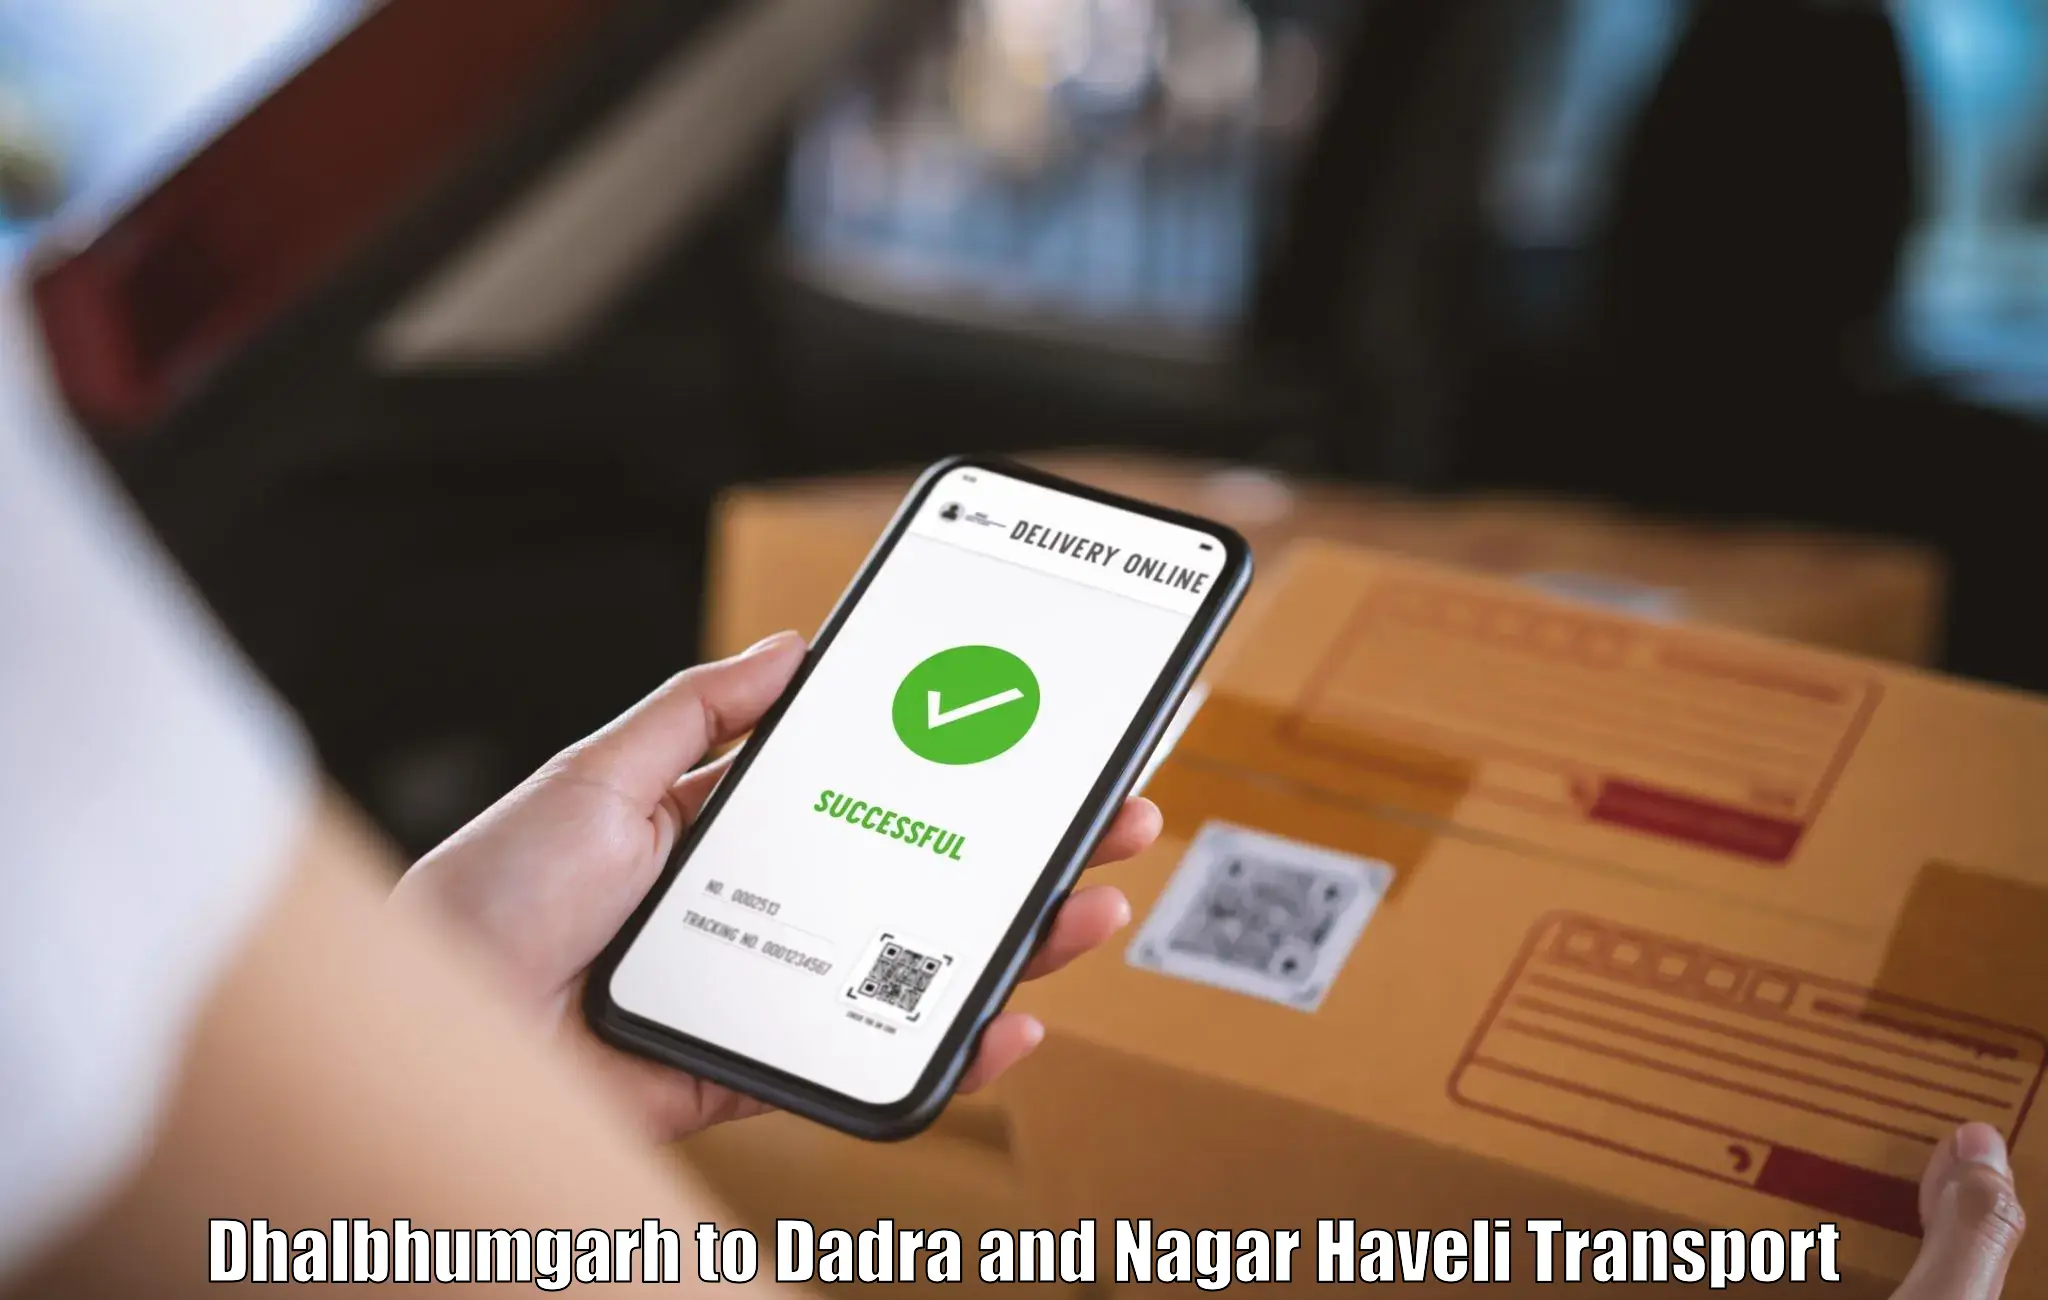 Package delivery services Dhalbhumgarh to Dadra and Nagar Haveli